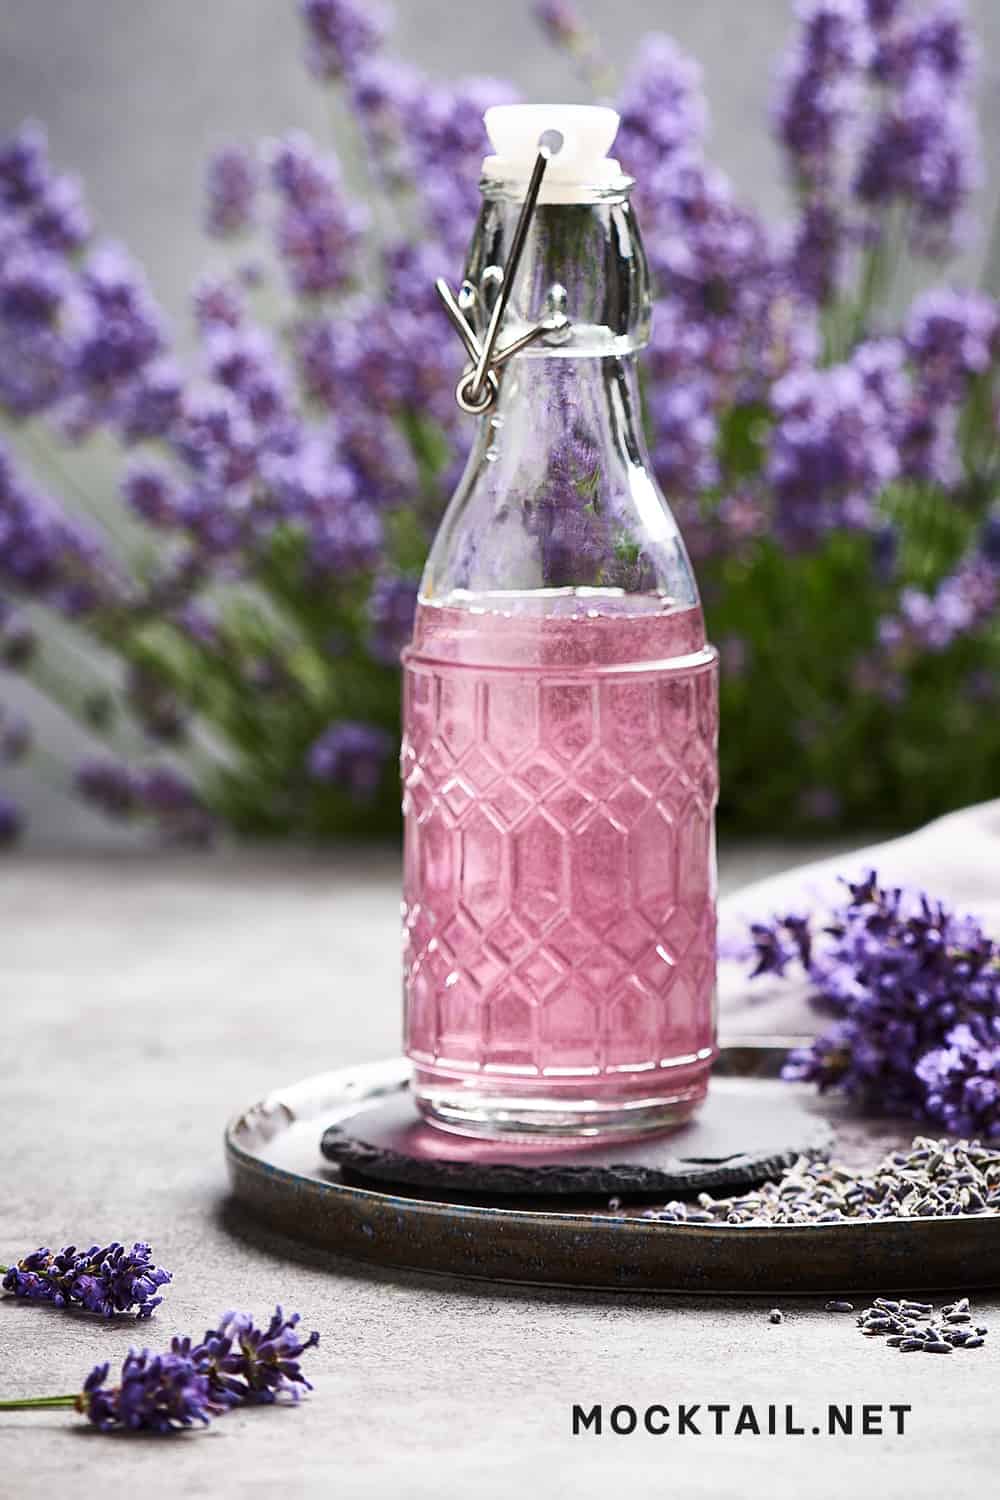 Where to Buy Lavender Syrup